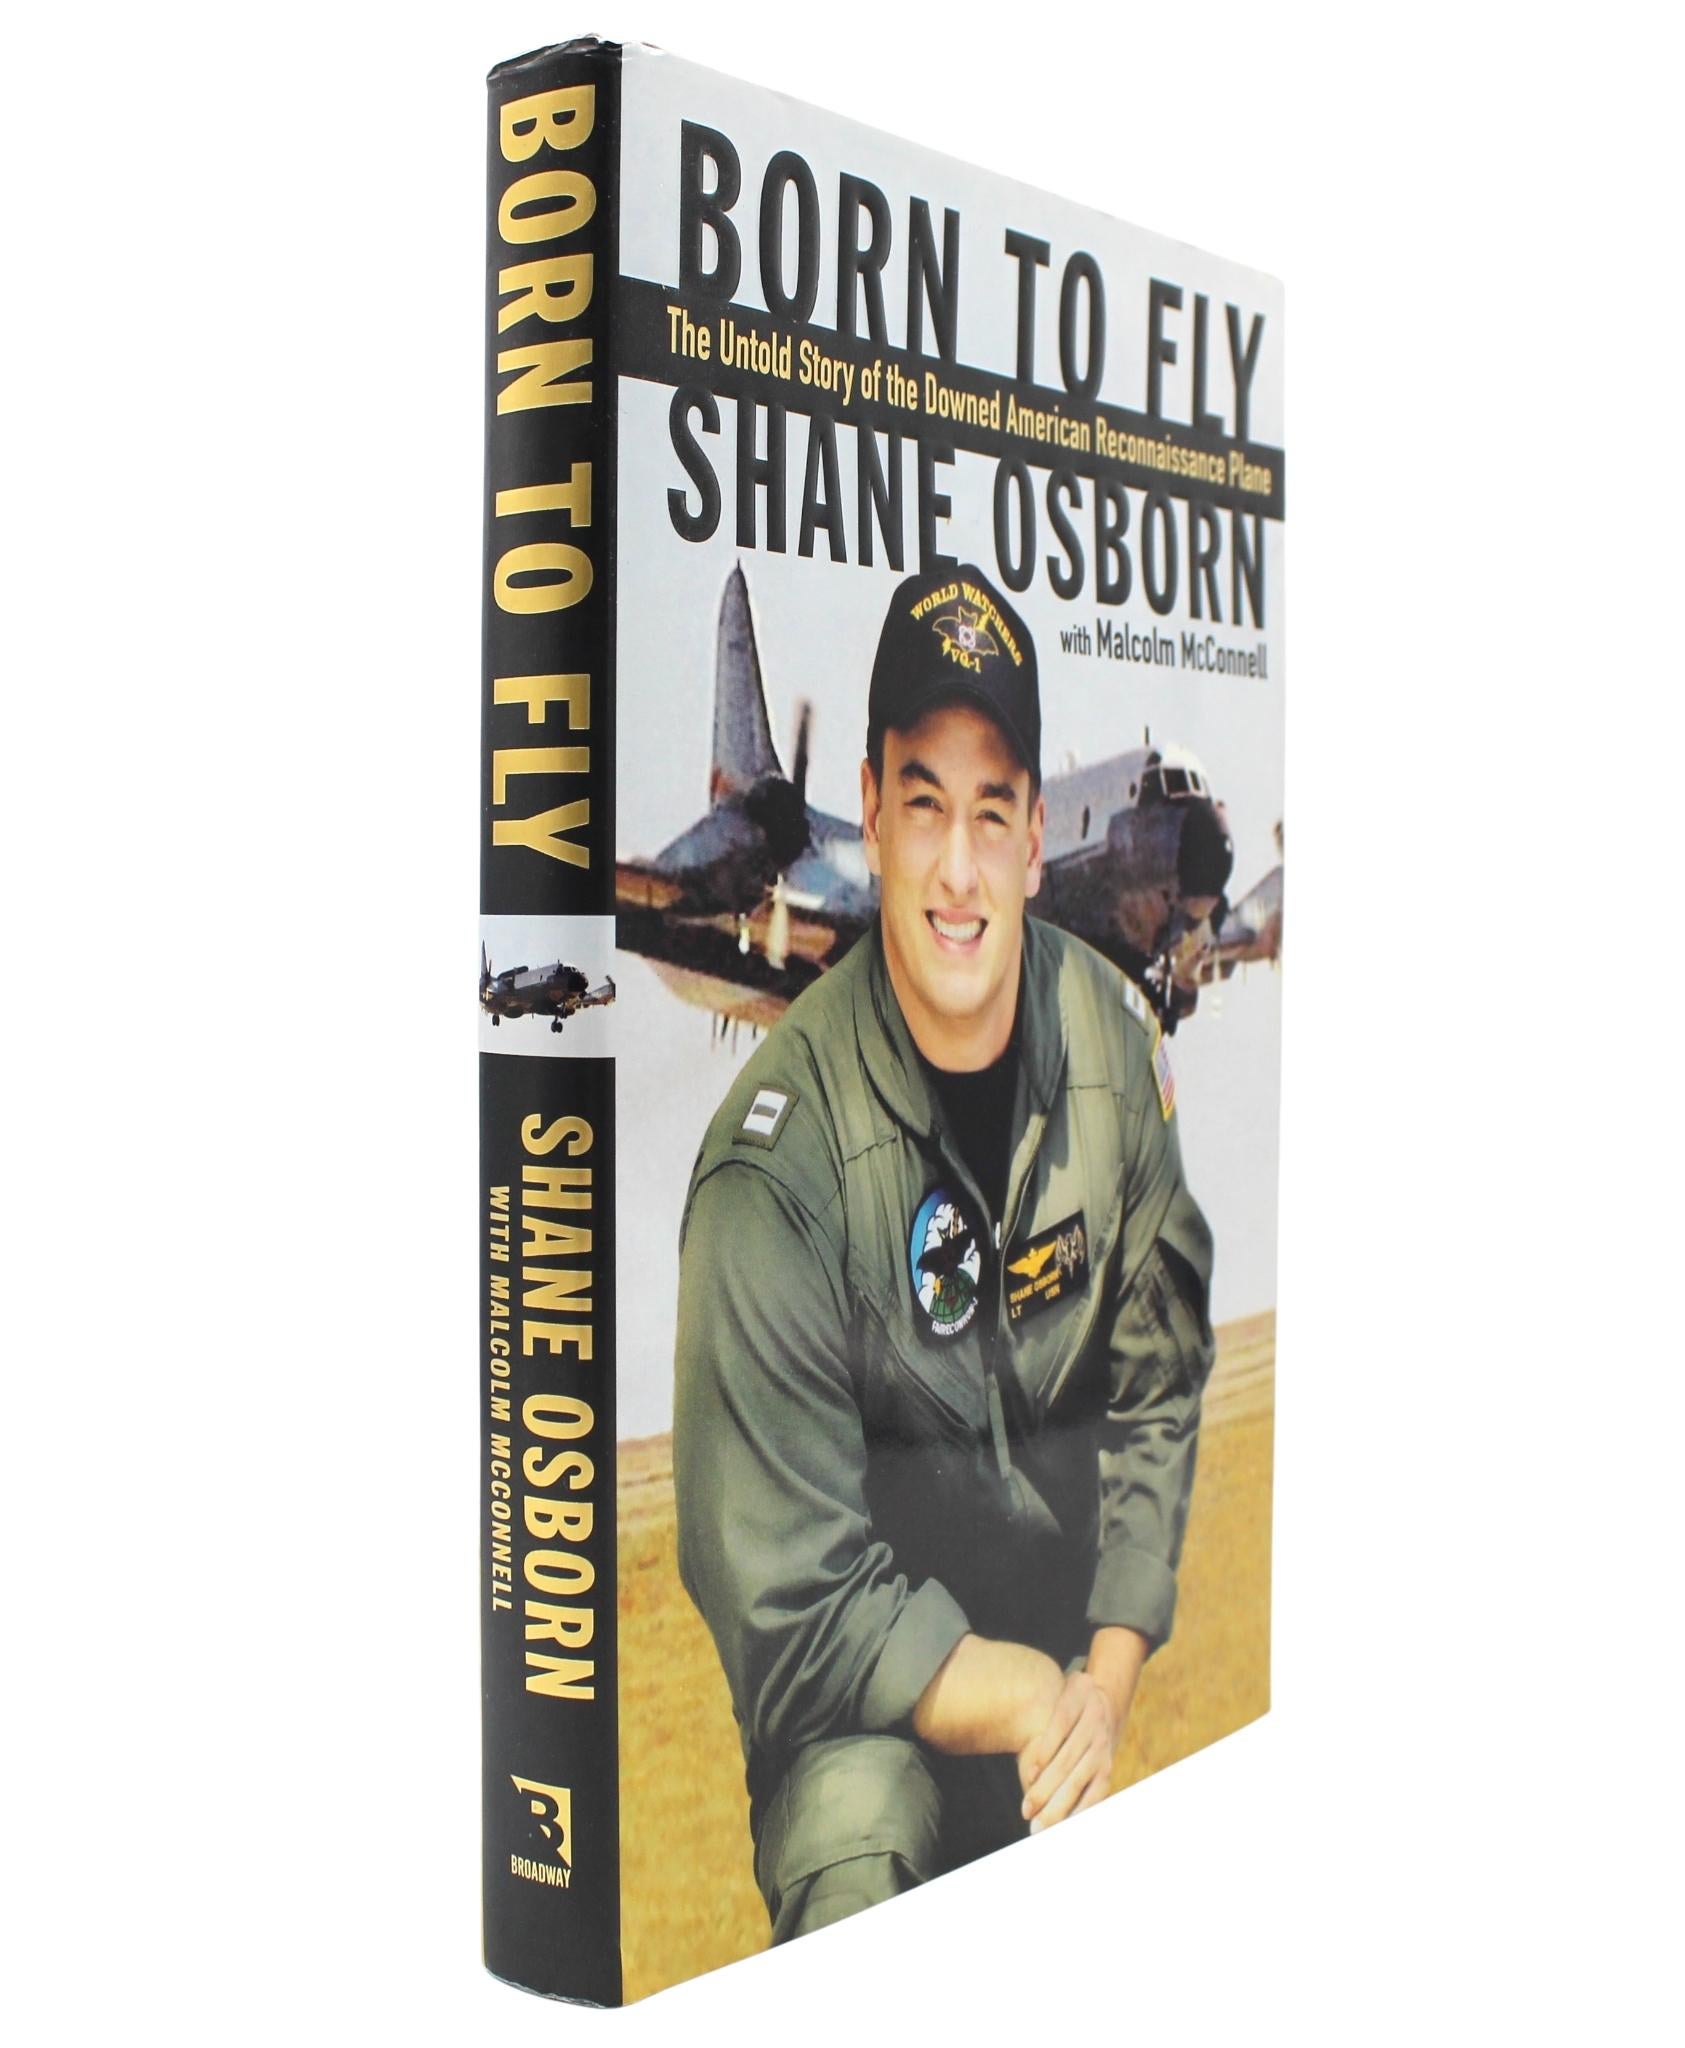 Osborne, Shane, McConnell, Malcolm. Born to Fly: The Heroic Story of Downed U.S. Navy Pilot Lt. Shane Osborn. New York: Broadway Books, 2001. First edition, first printing. Signed by Osborne on the full title page. In the publisher's original dust